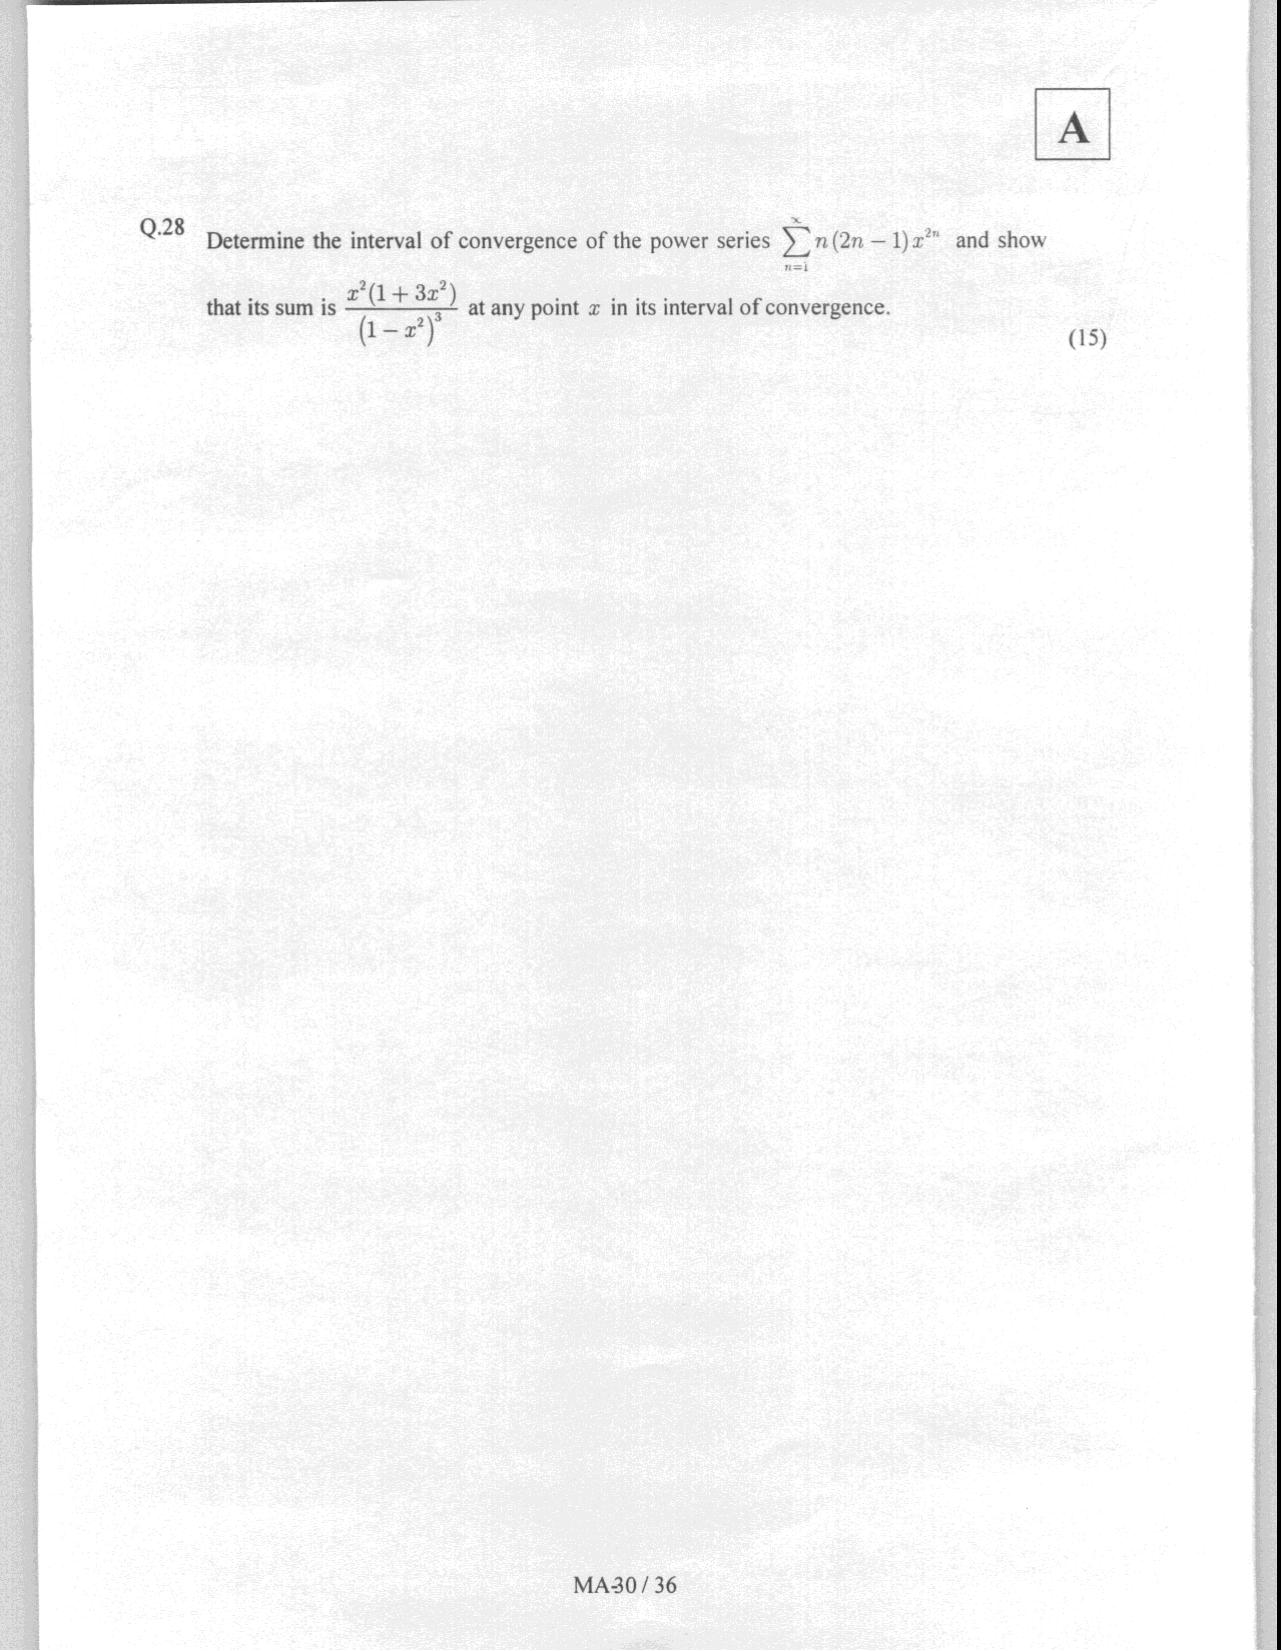 JAM 2008: MA Question Paper - Page 32